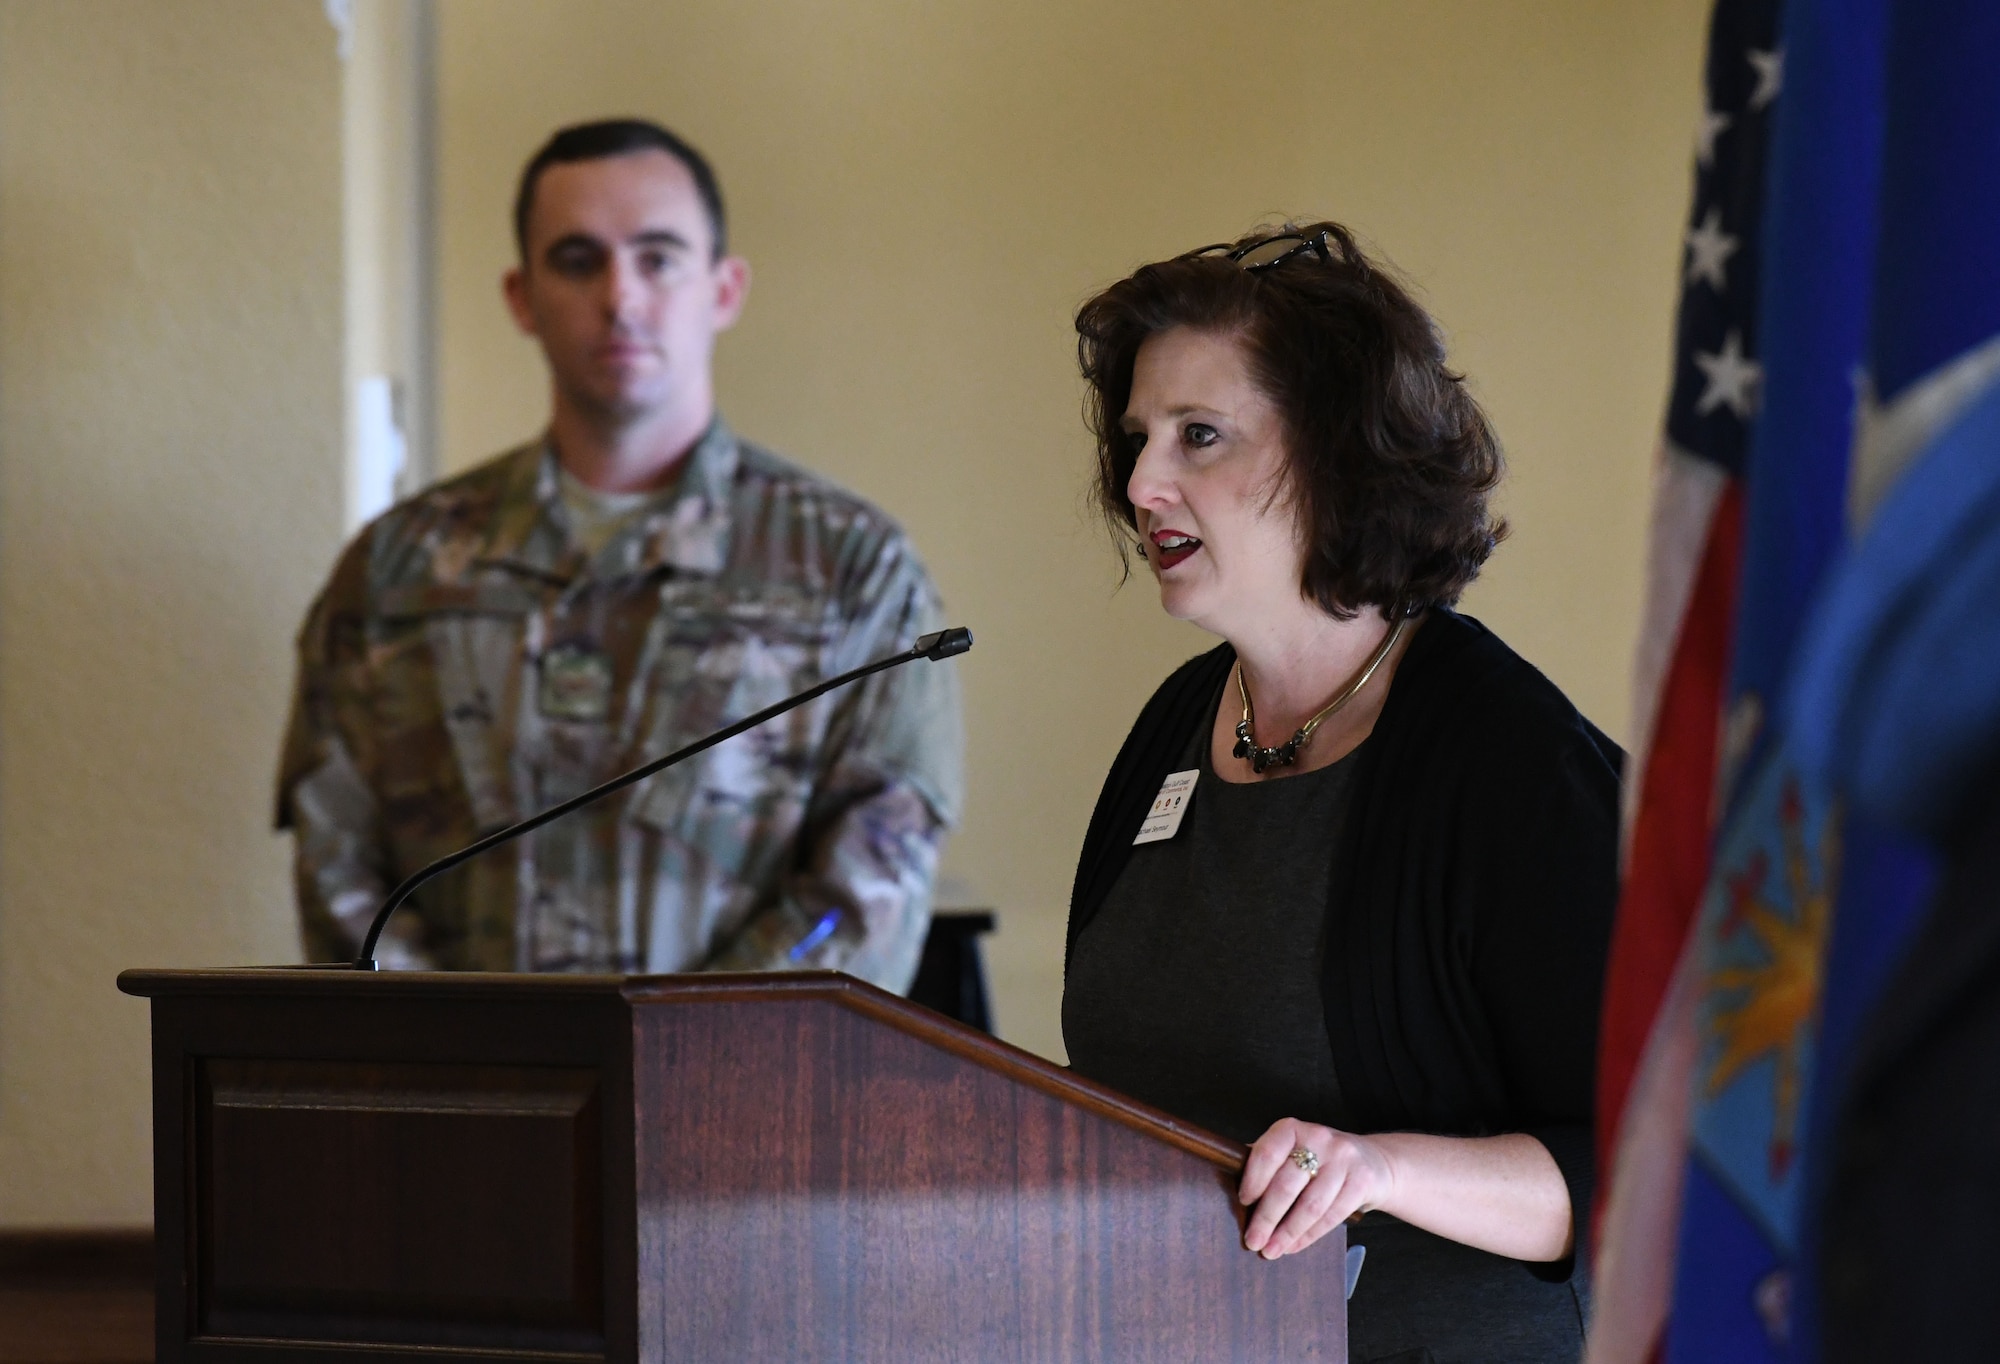 Rachel Seymour, Biloxi Chamber of Commerce director, delivers comments during the Biloxi Chamber Morning Call in the Bay Breeze Event Center at Keesler Air Force Base, Mississippi, Oct. 11, 2018. Local business and community leaders attended the event, hosted by the 81st Training Wing, to learn more about the base’s mission and its Airmen. (U.S. Air Force photo by Kemberly Groue)